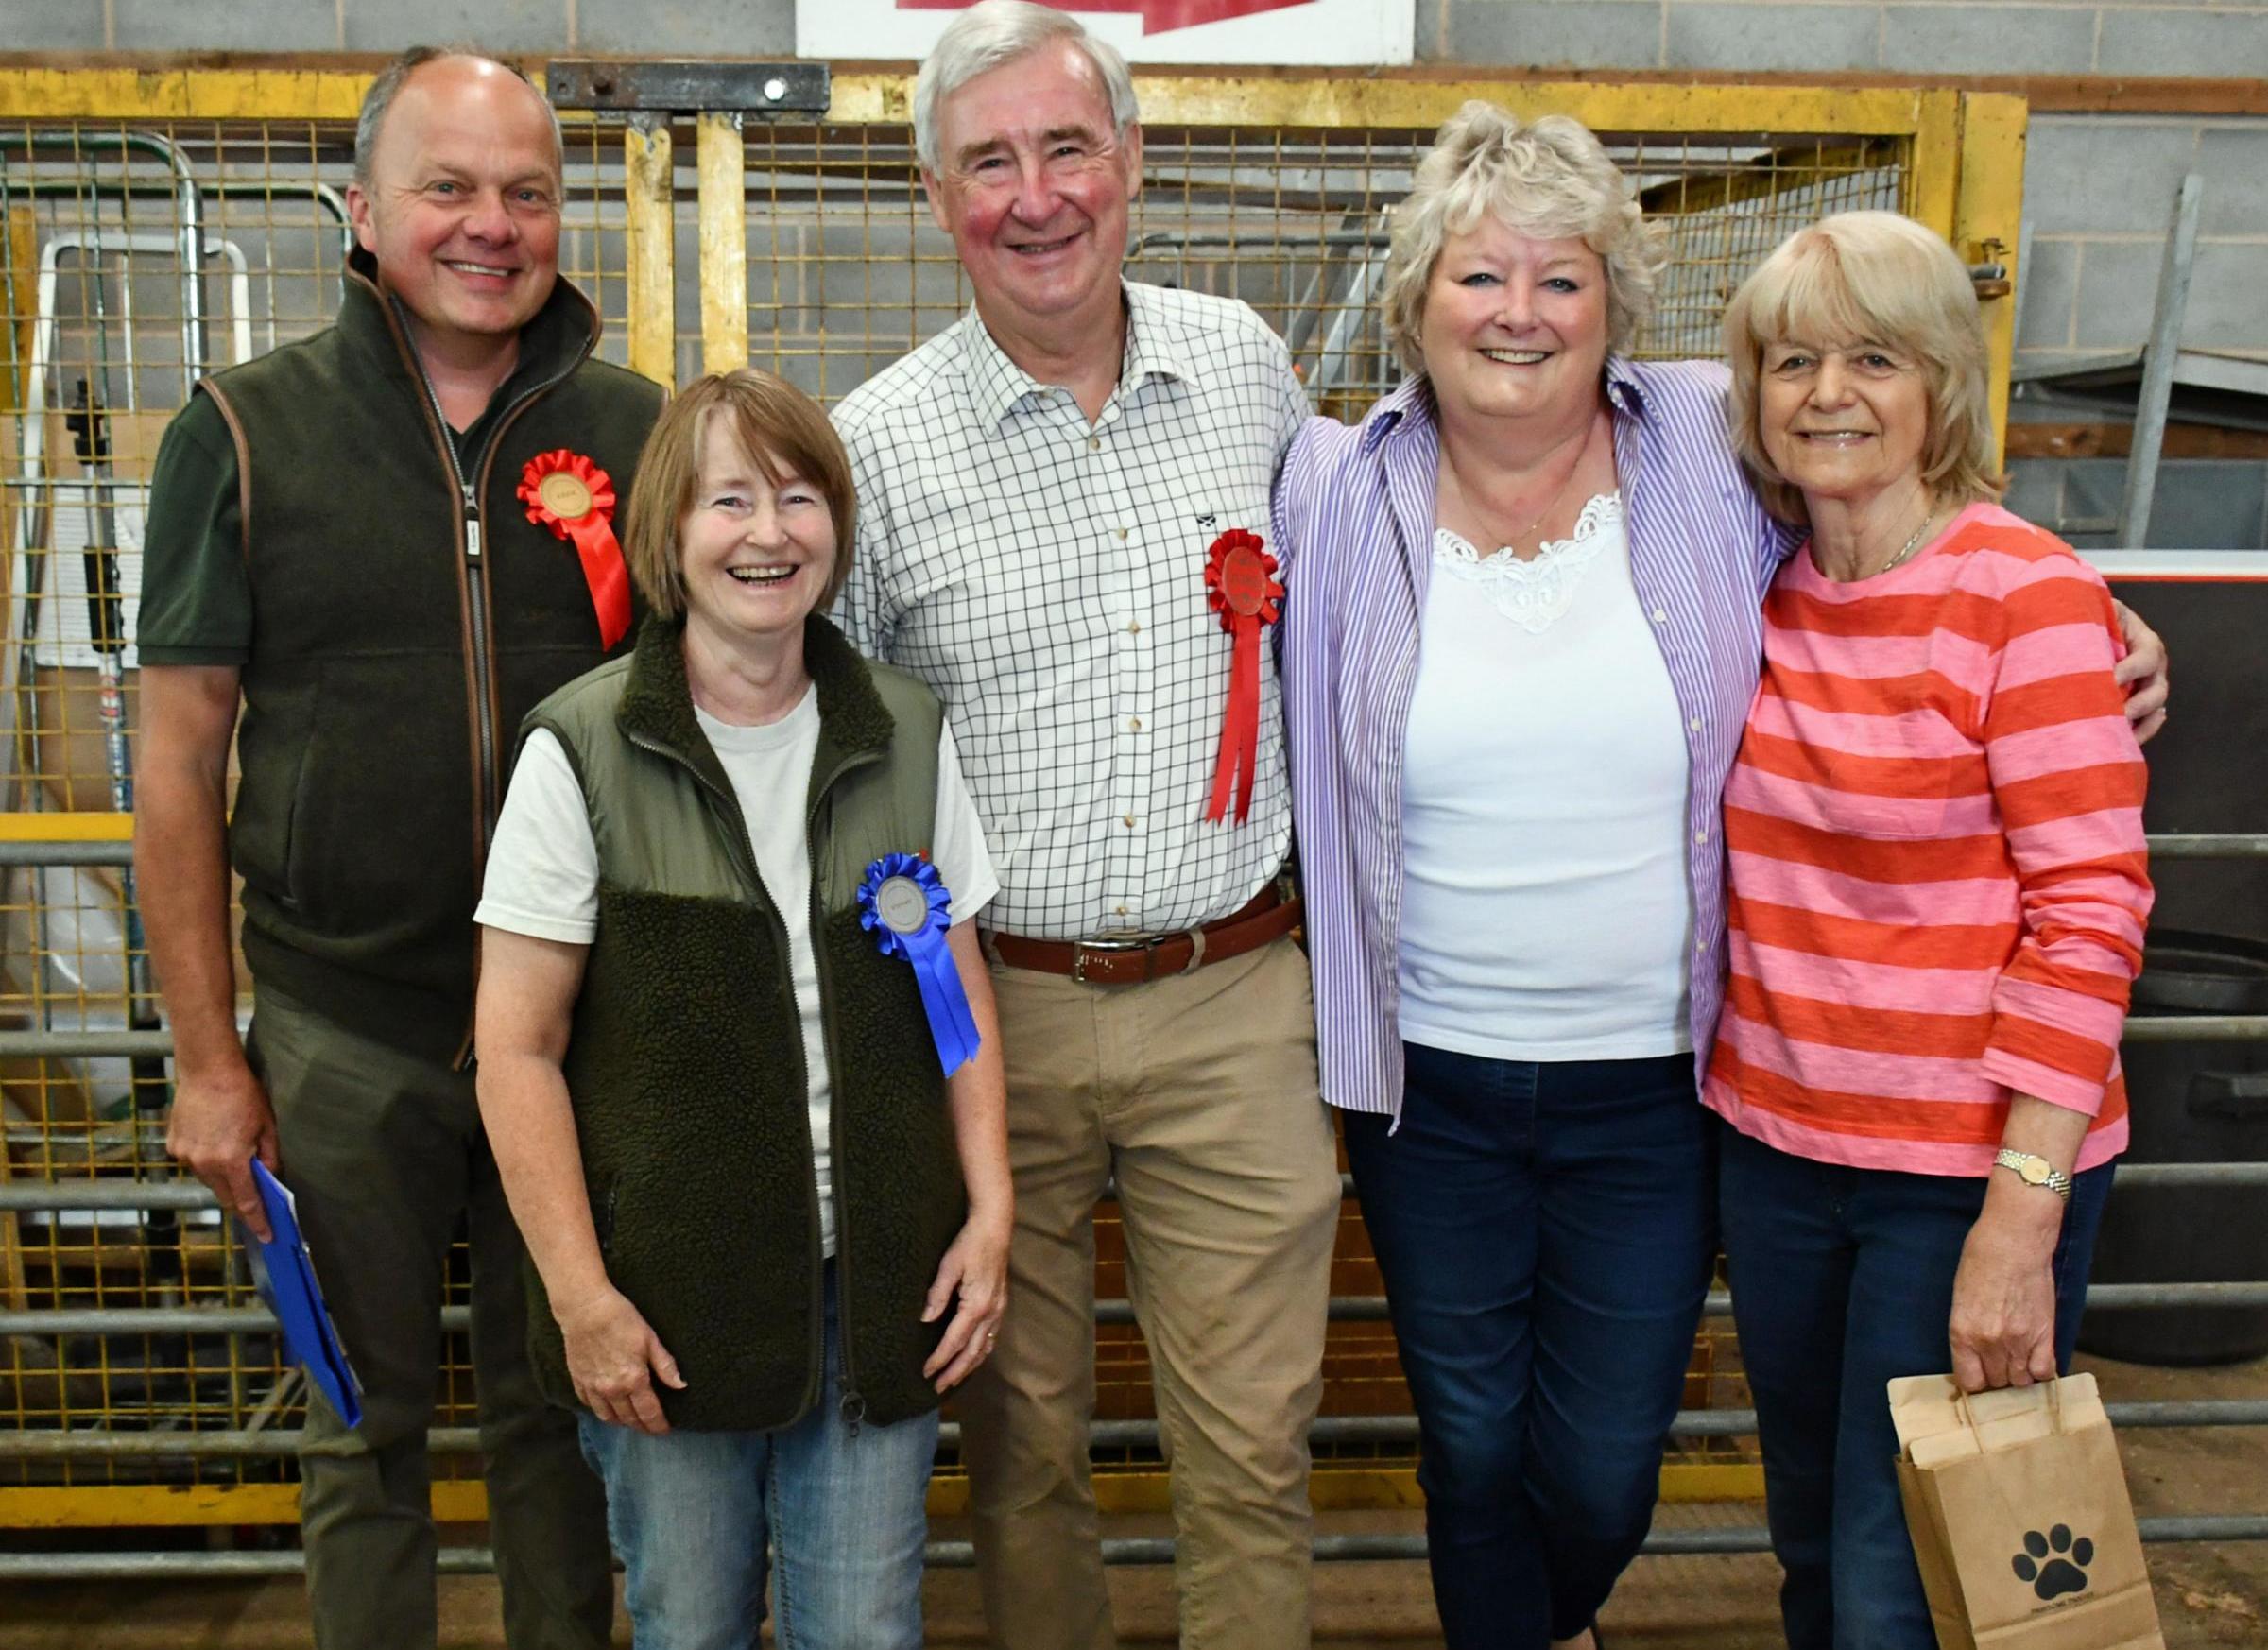 The event at Thirsk Auction Mart supported Herriot Hospice’s Lambert Hospital appeal